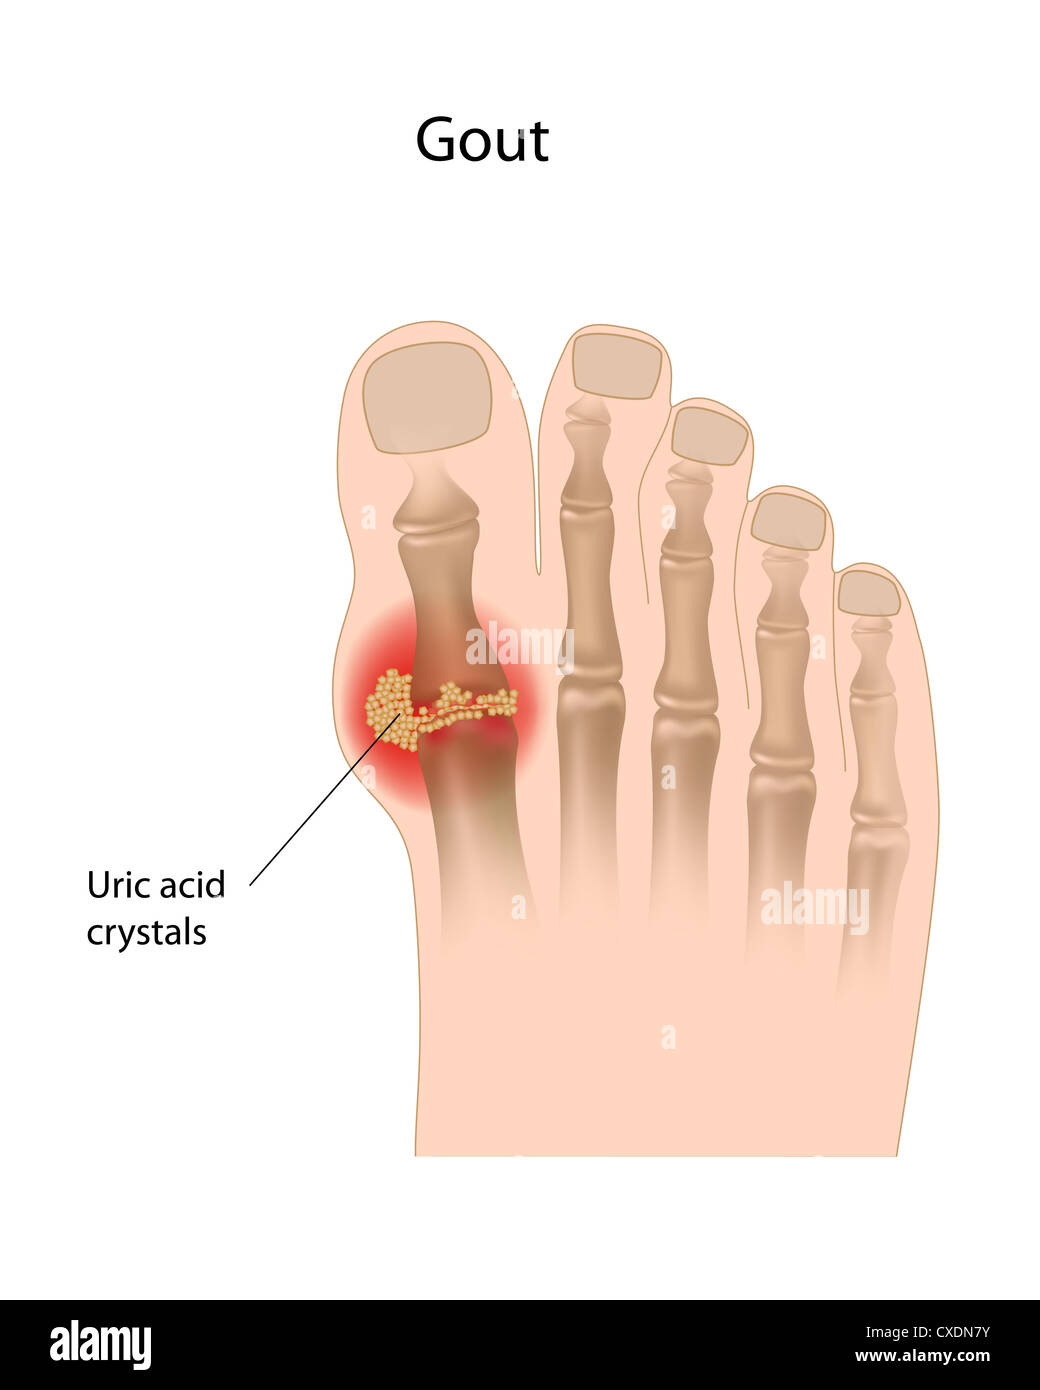 Gout of the big toe Stock Photo